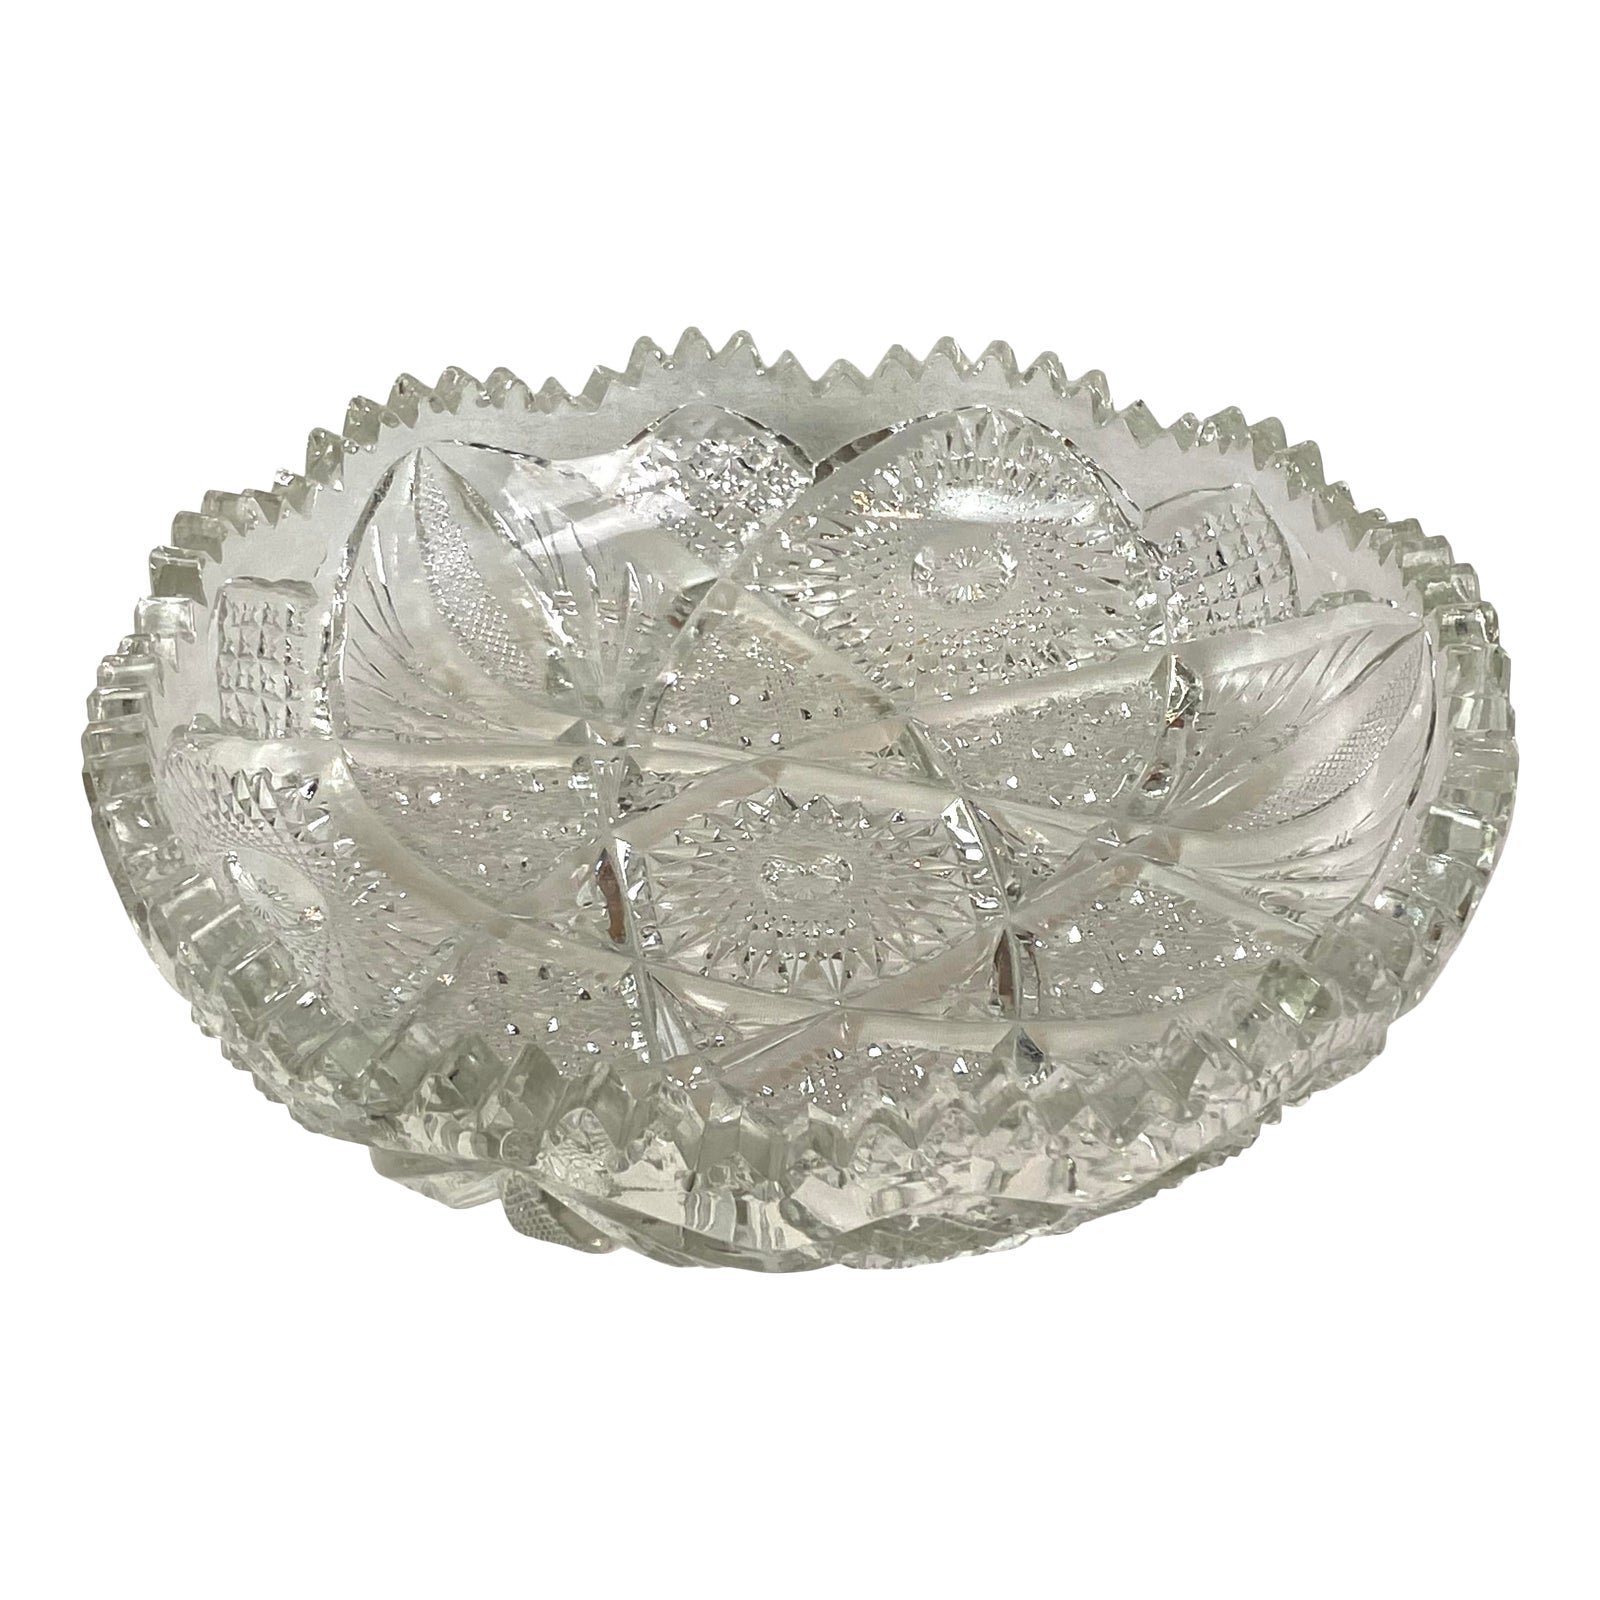 Large Ornate Crystal Cut Glass Serving Bowl Ashtray ABBY ESSIE STUDIOS